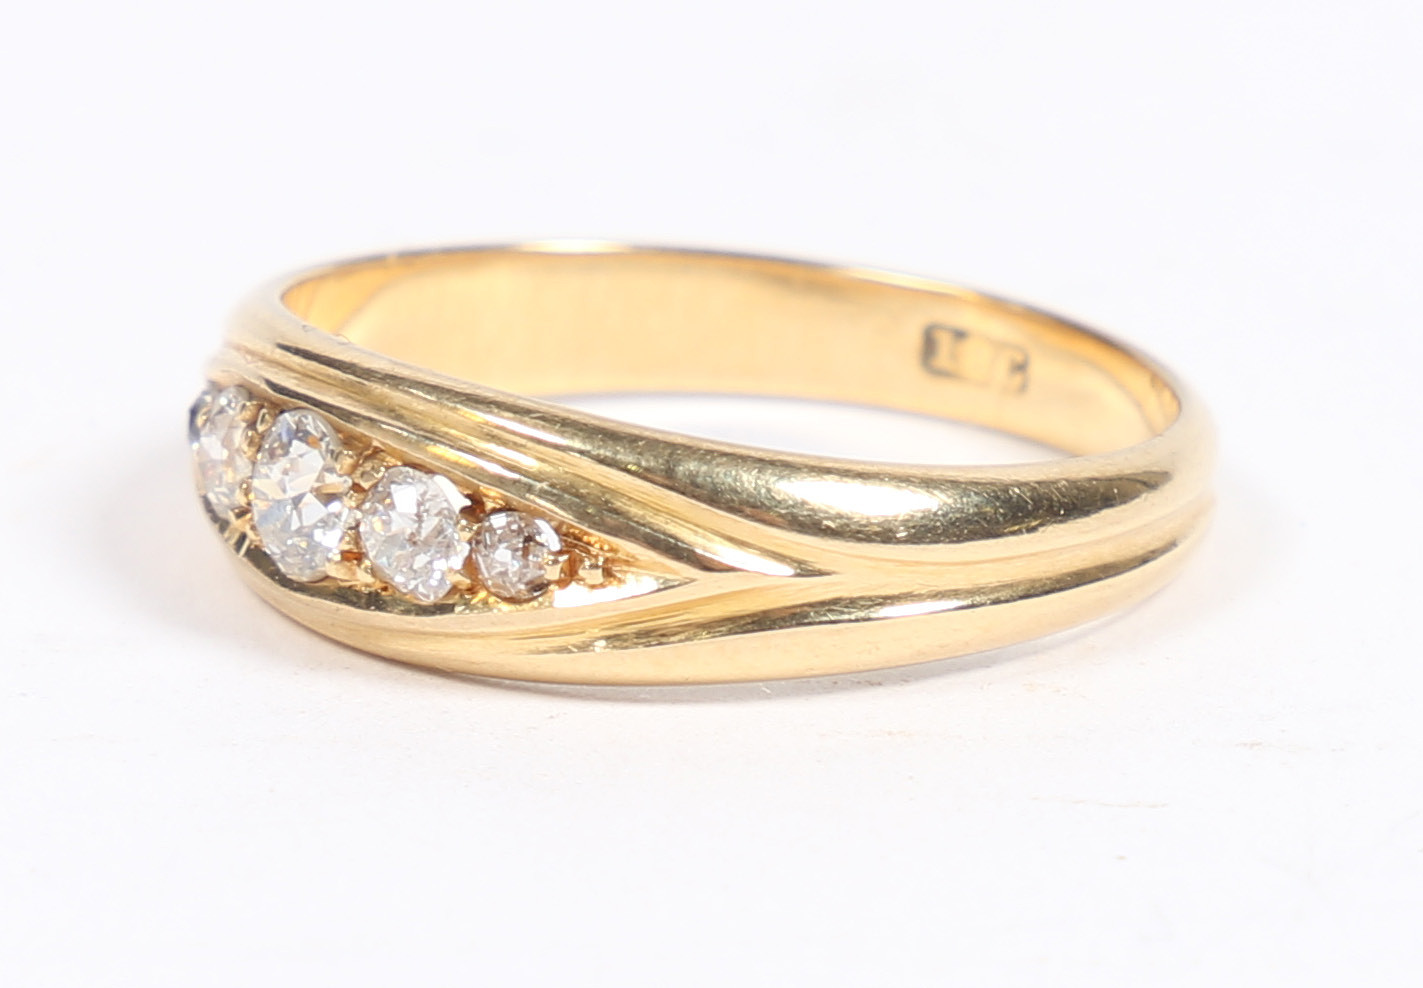 AN 18 CARAT GOLD AND DIAMOND RING. - Image 6 of 6